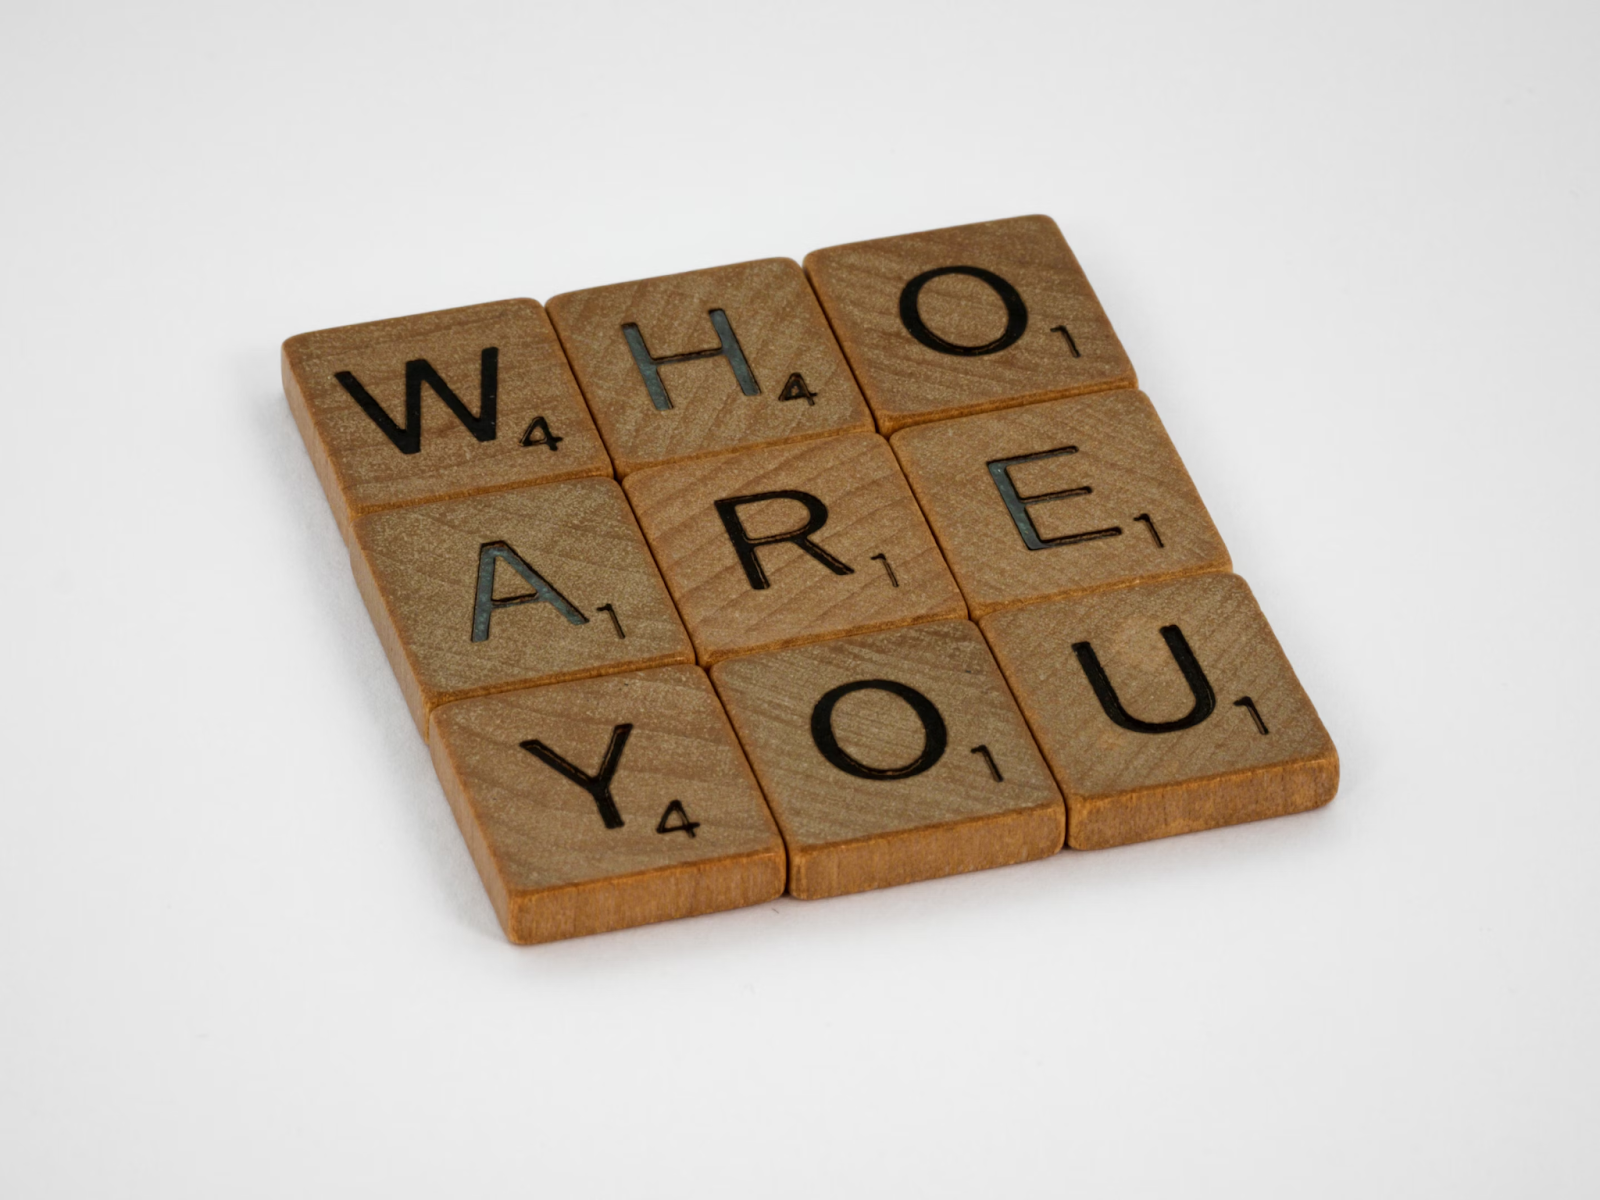 Brown wooden puzzle made of square blocks, showing the word 'WHO ARE YOU'